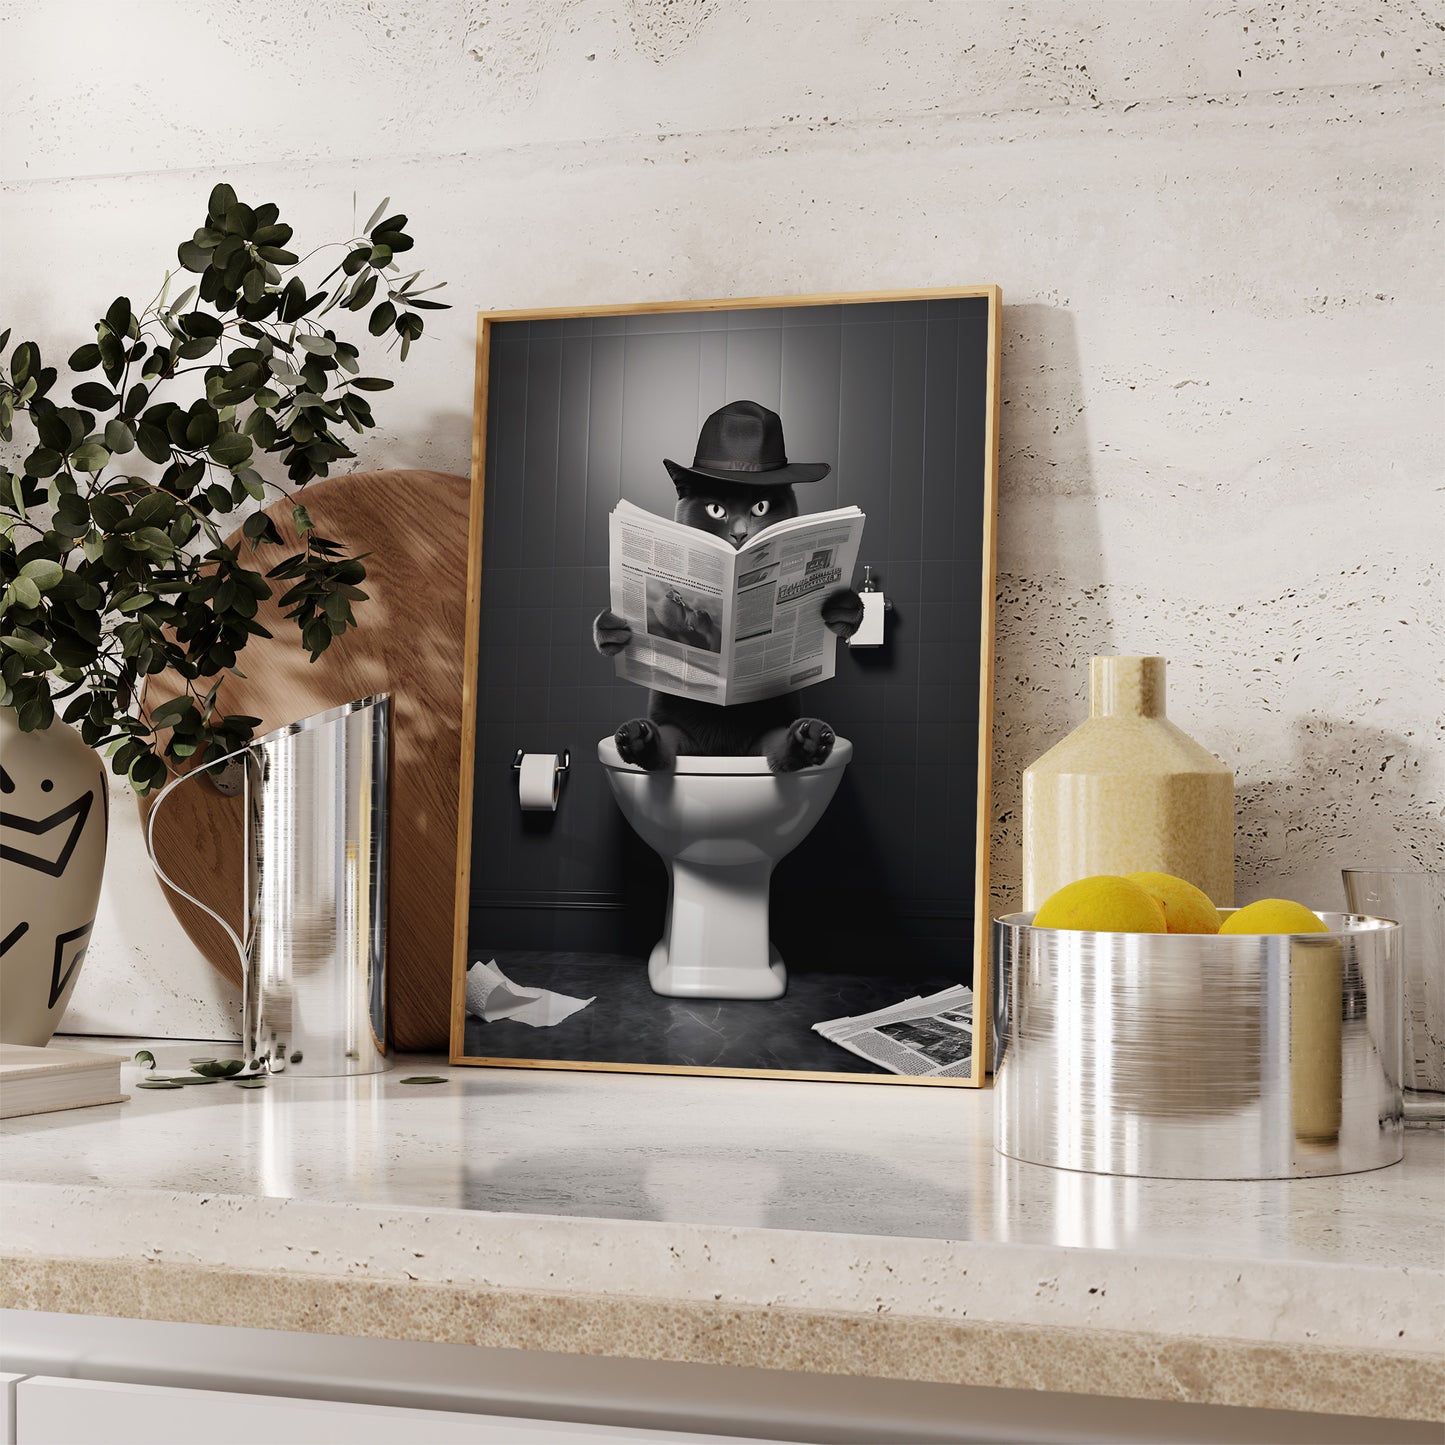 A whimsical framed picture of an anthropomorphic toilet reading a newspaper.